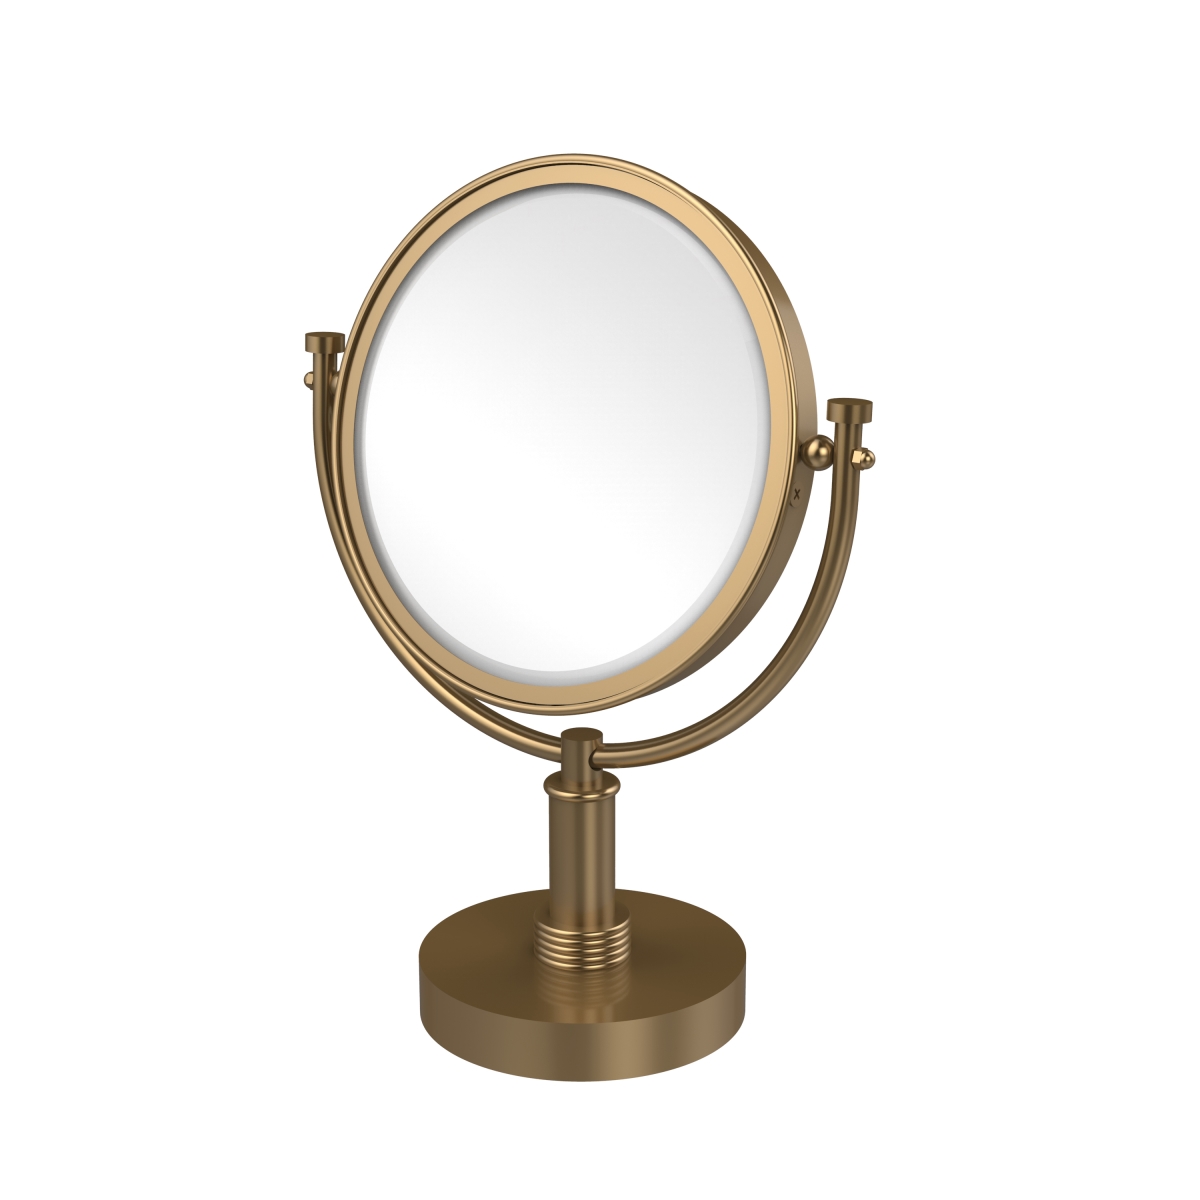 Dm-4g-2x-bbr Grooved Ring Style 8 In. Vanity Top Make-up Mirror 2x Magnification, Brushed Bronze